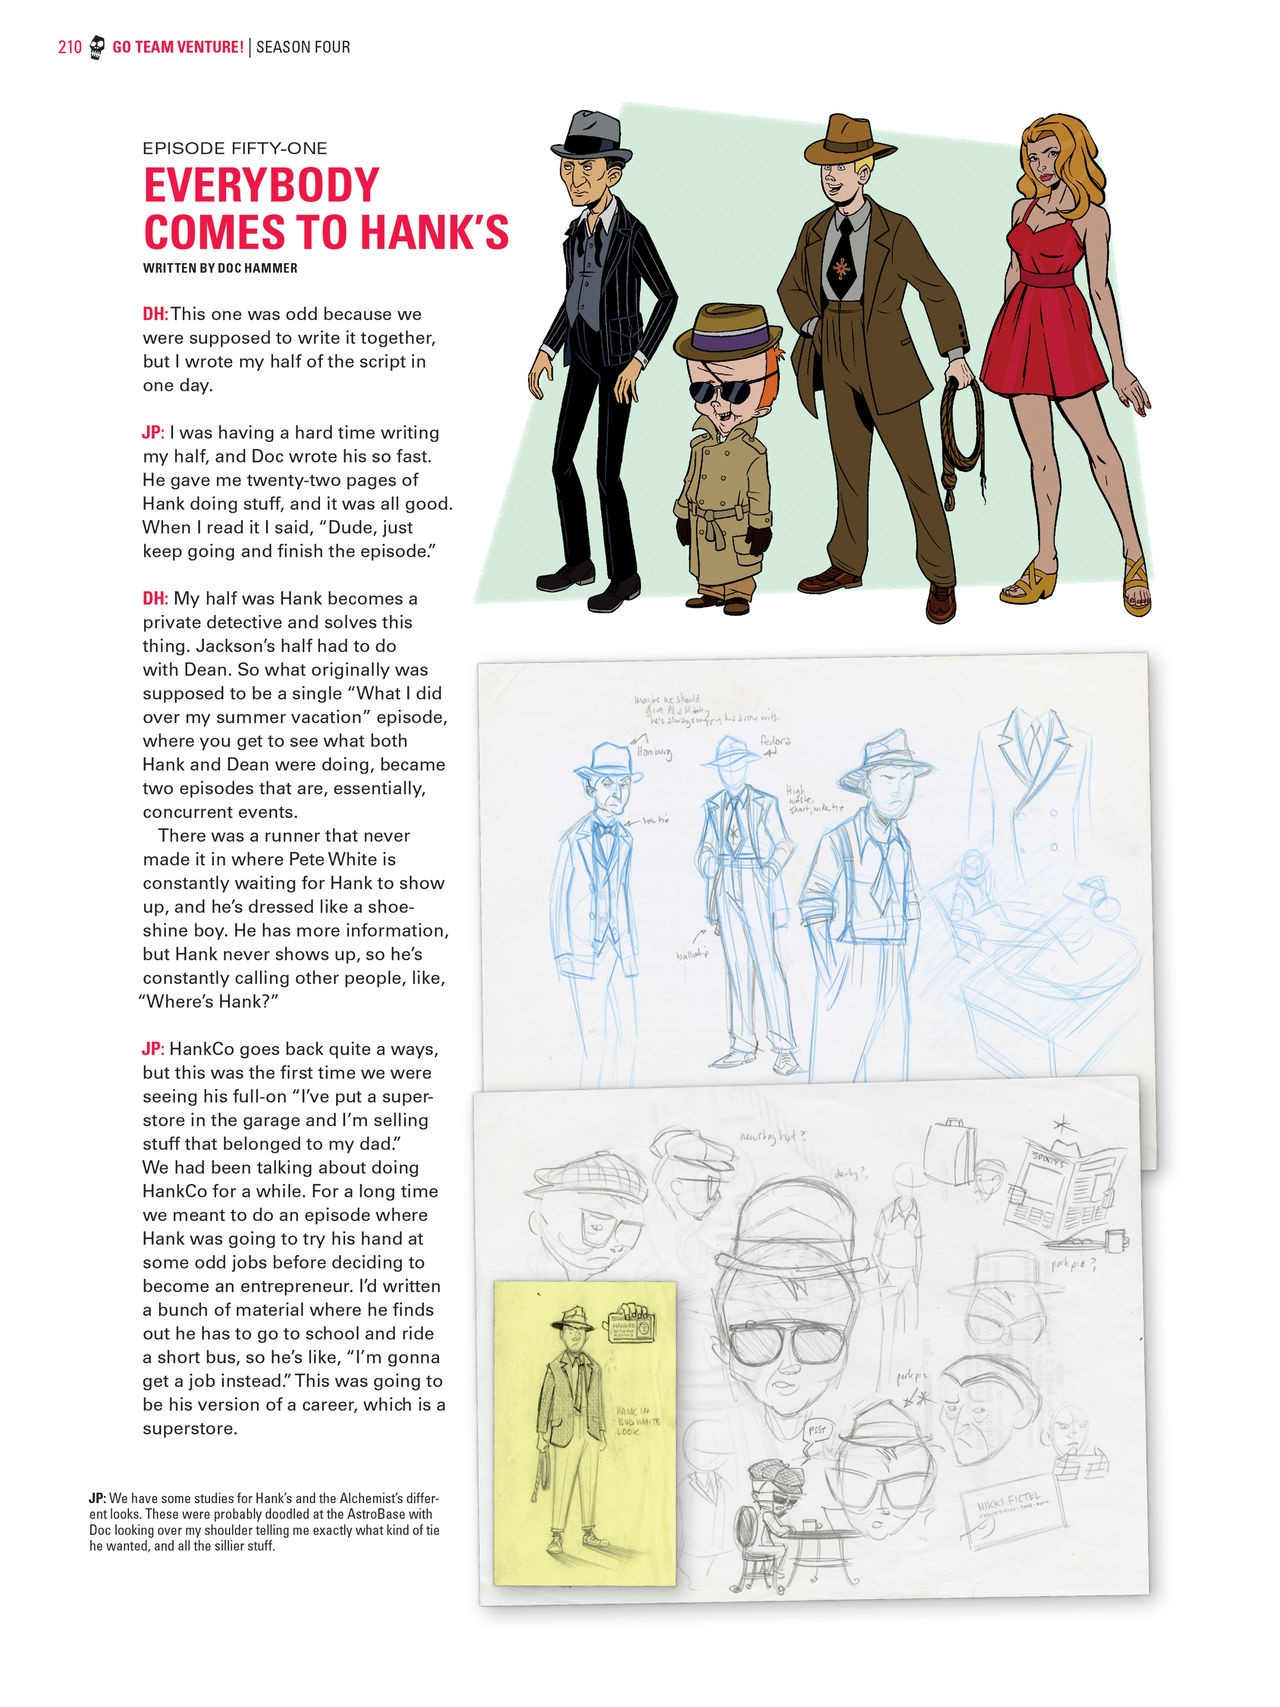 Go Team Venture! - The Art and Making of the Venture Bros 208